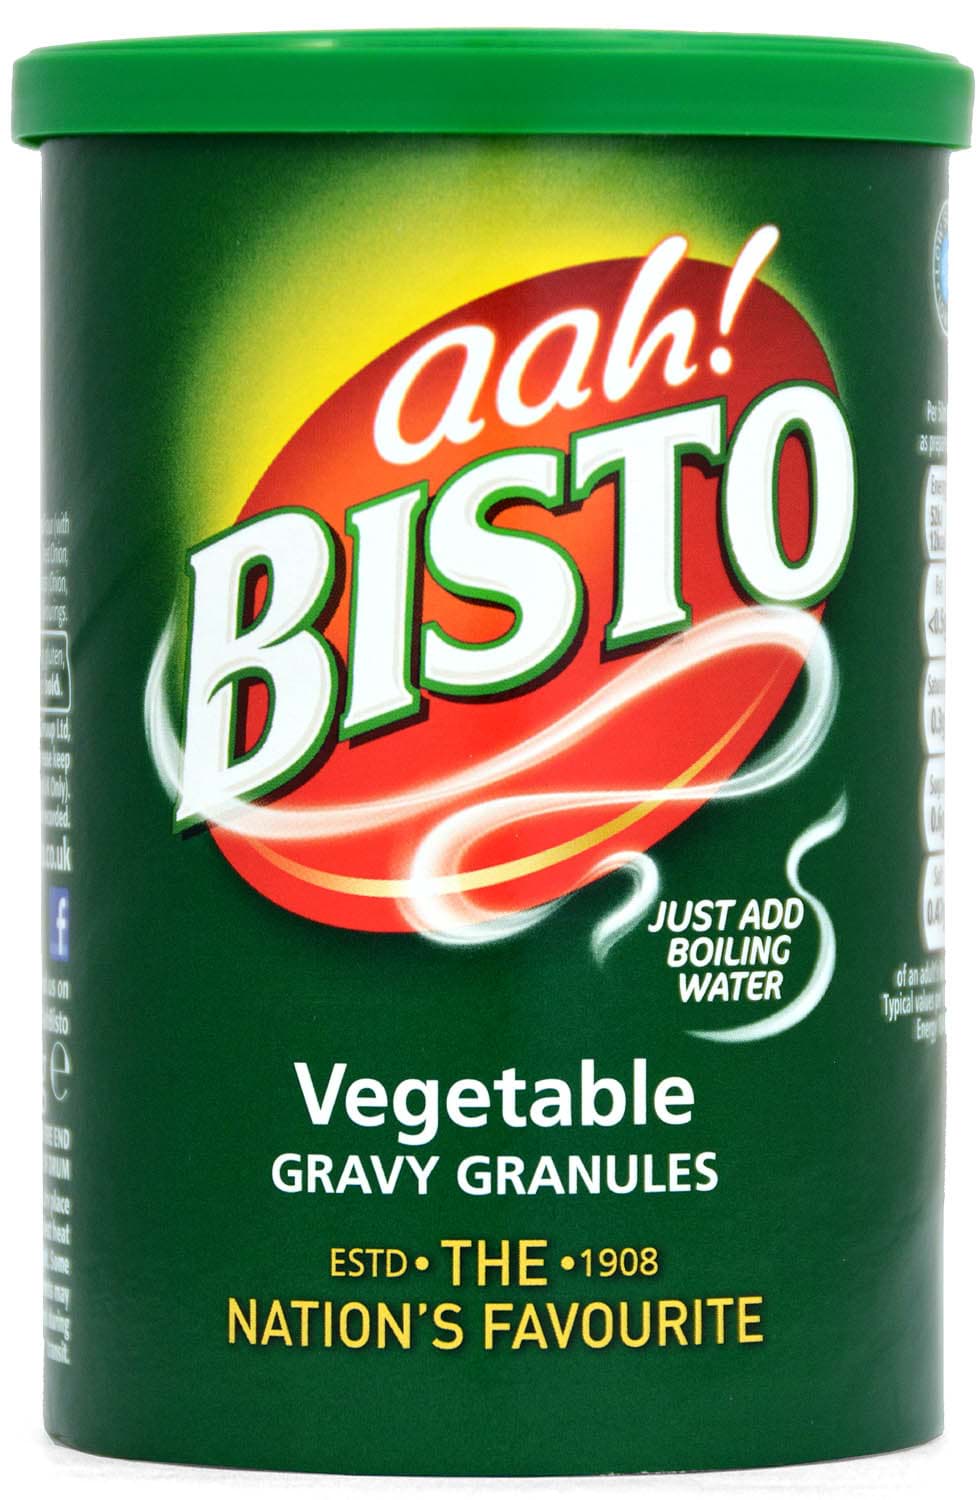 Picture of Bisto Gravy Granules for Vegetable Dishes